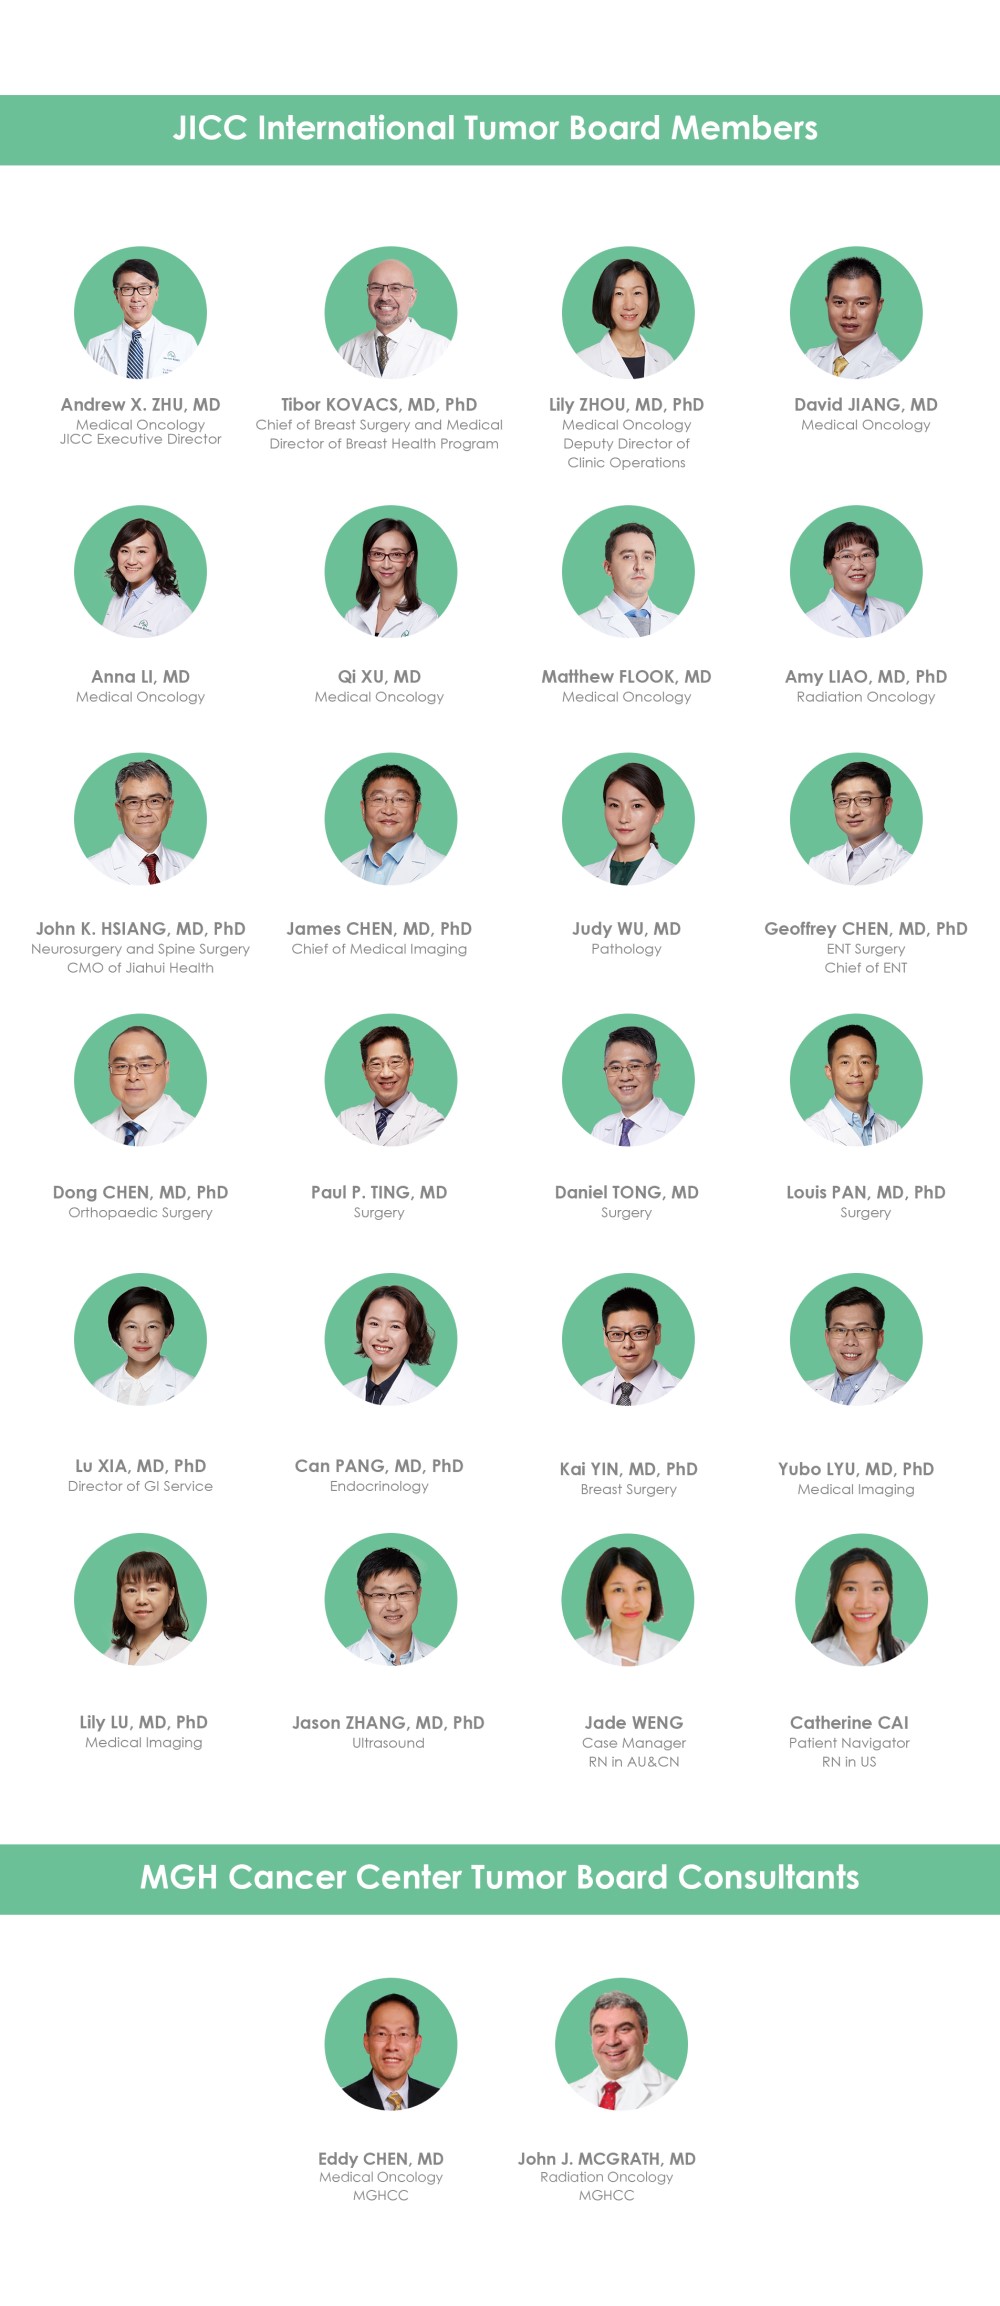 Small photos of all the Mass General Cancer Center physicians and the Jiahui International Cancer Center Tumor Board.